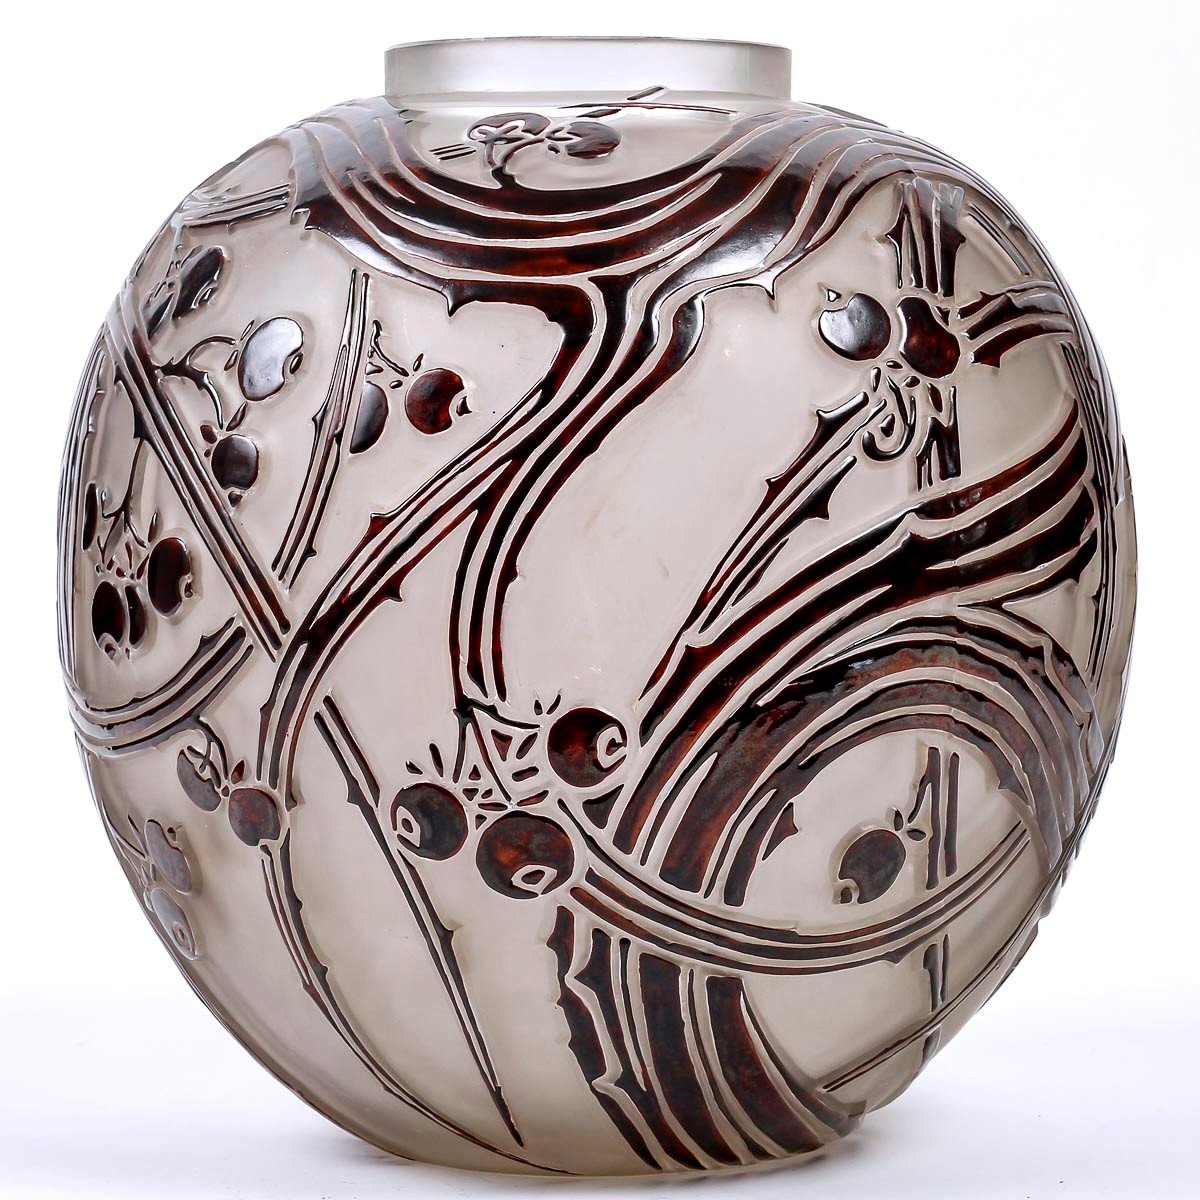 1924 René Lalique - Vase Baies Berries Frosted Glass With Brown Enamel